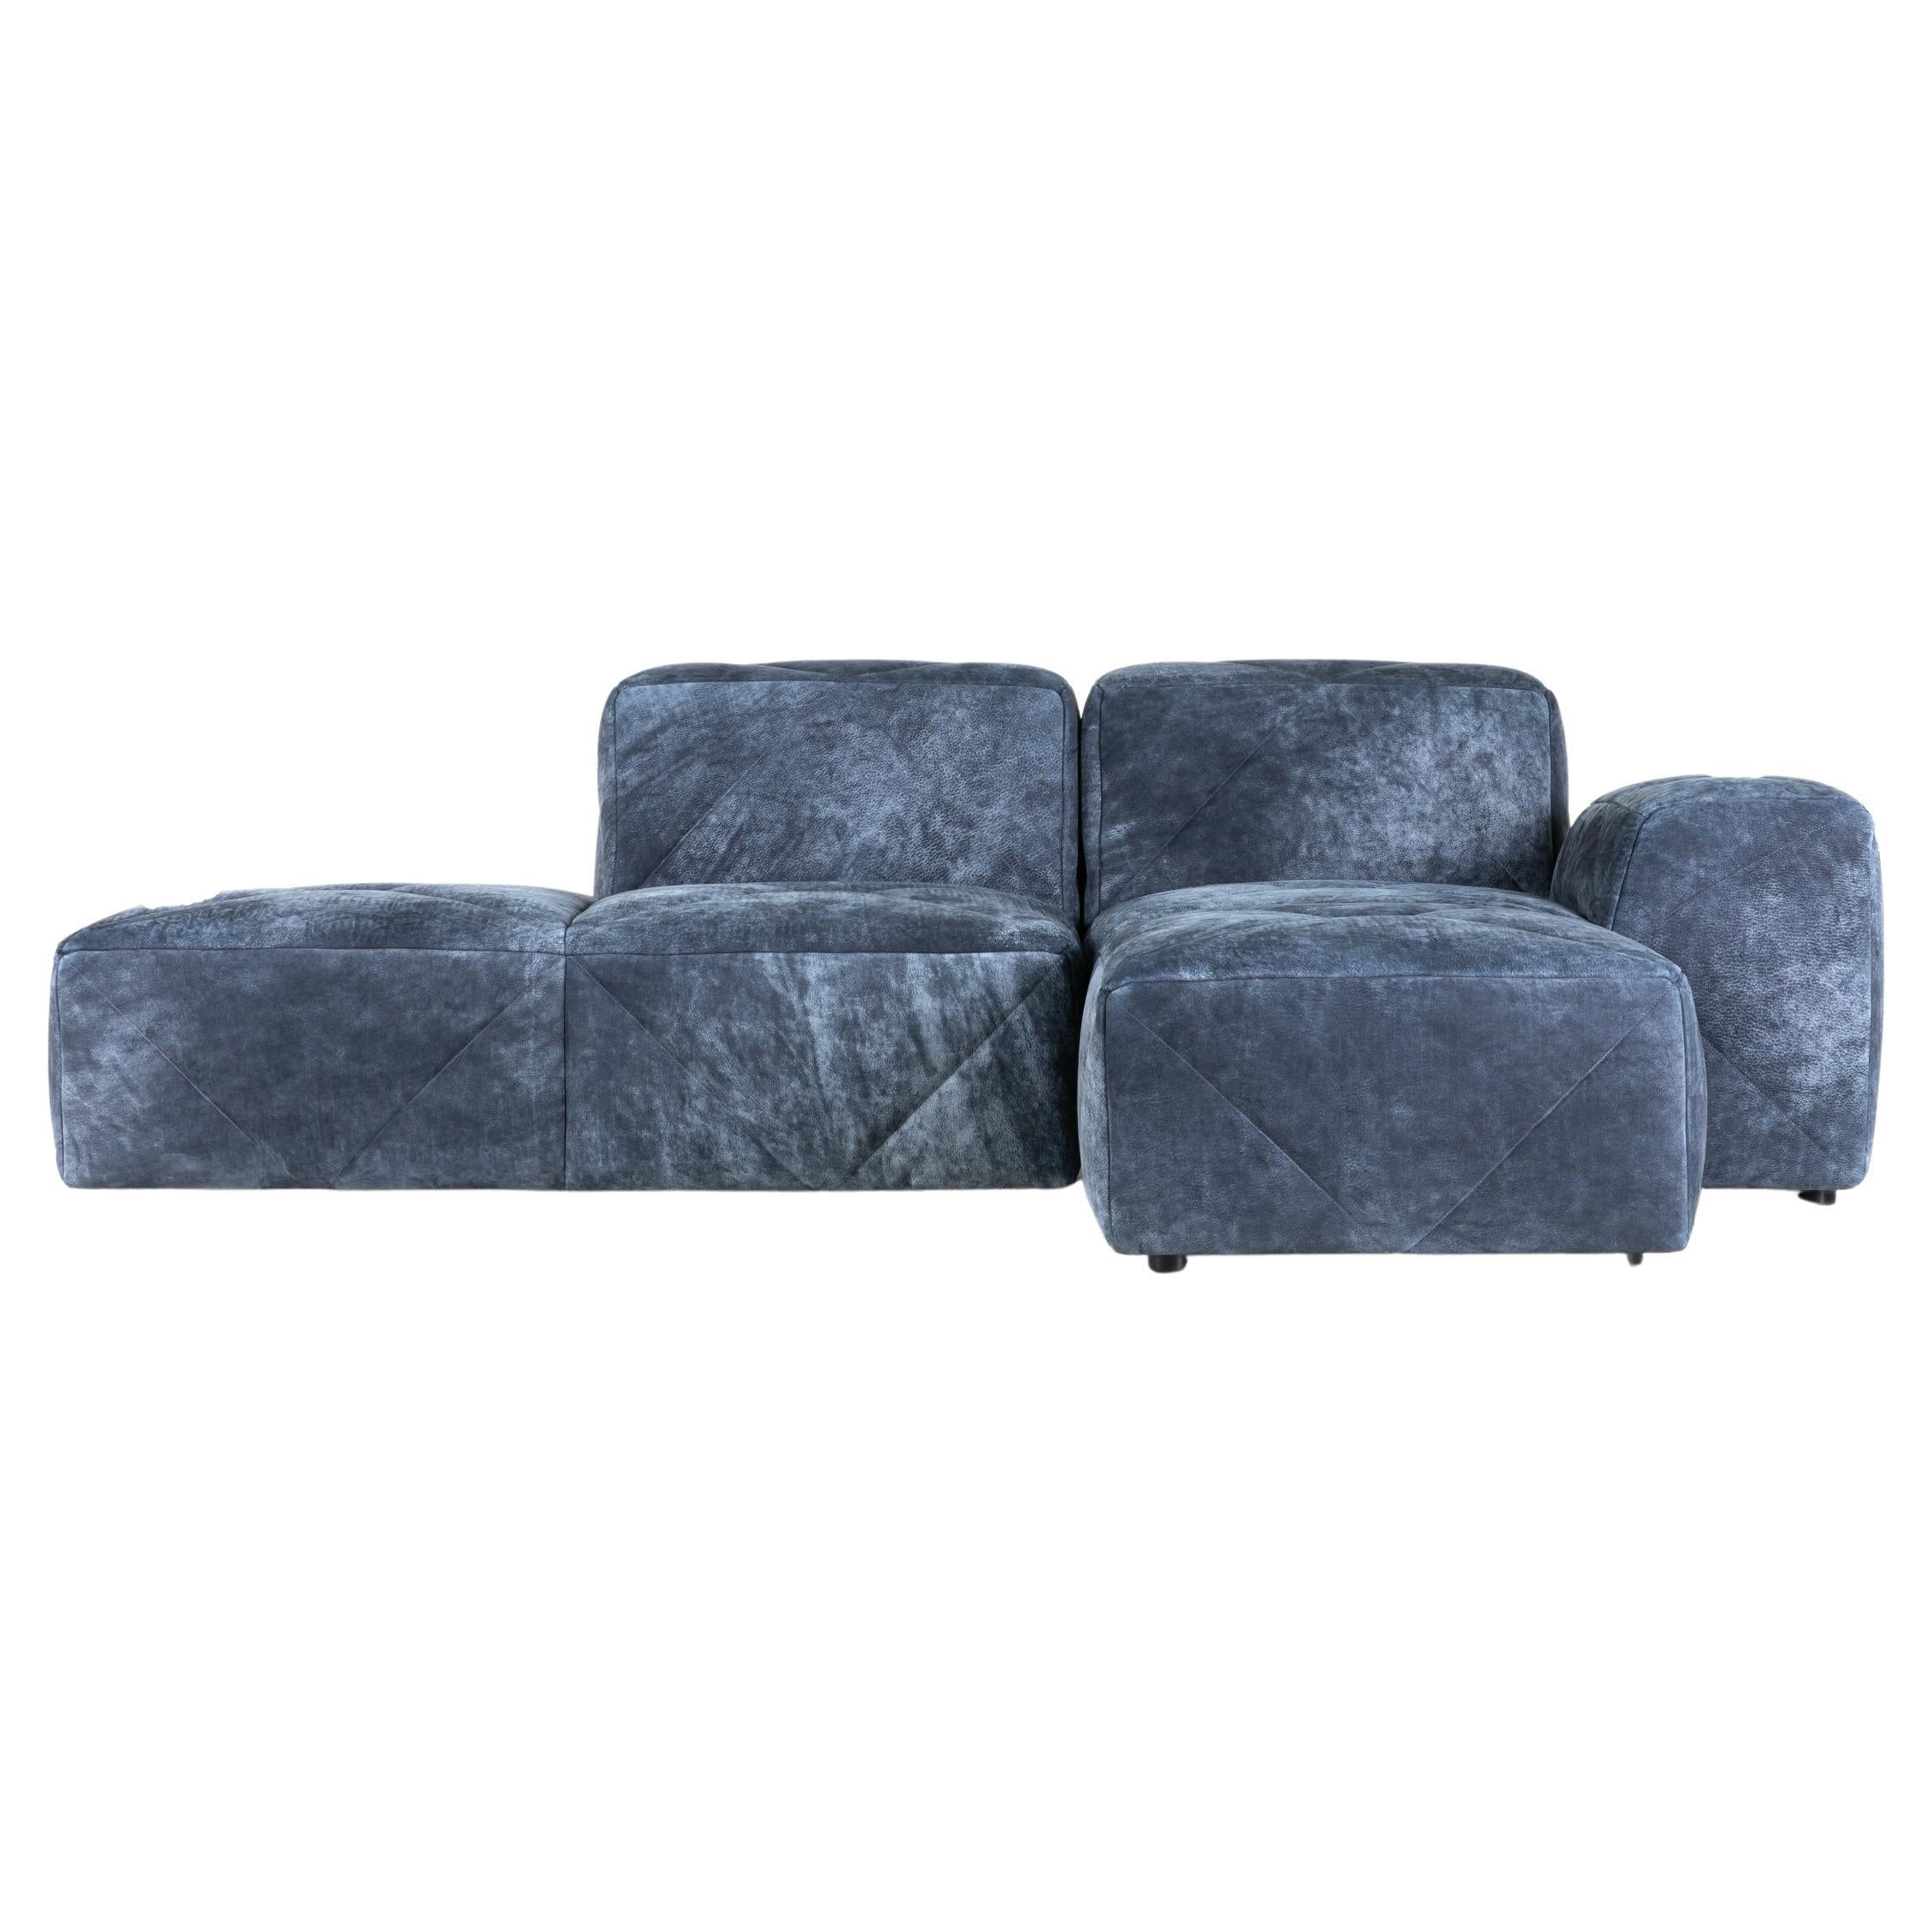 Moooi BFF Right Arm Chaise Longue Sofa in Dwarf Rhino Buffed Blue Upholstery For Sale